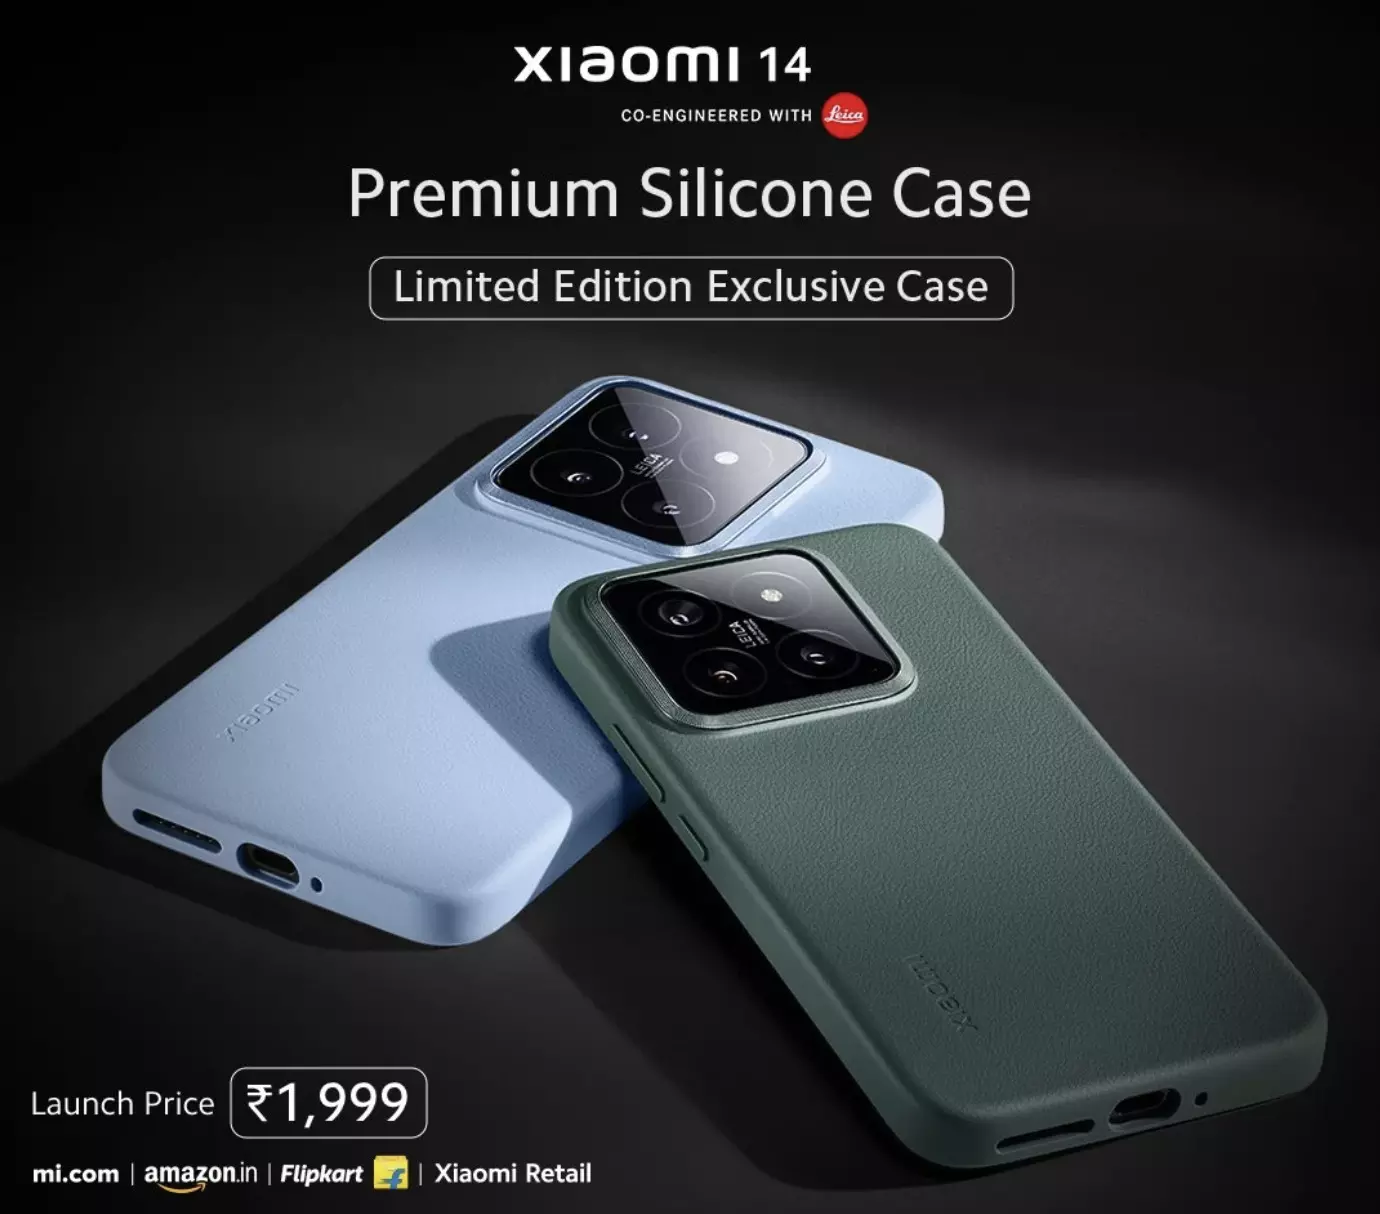 Limited Edition Xiaomi 14 premium silicone case now available on Amazon, Flipkart